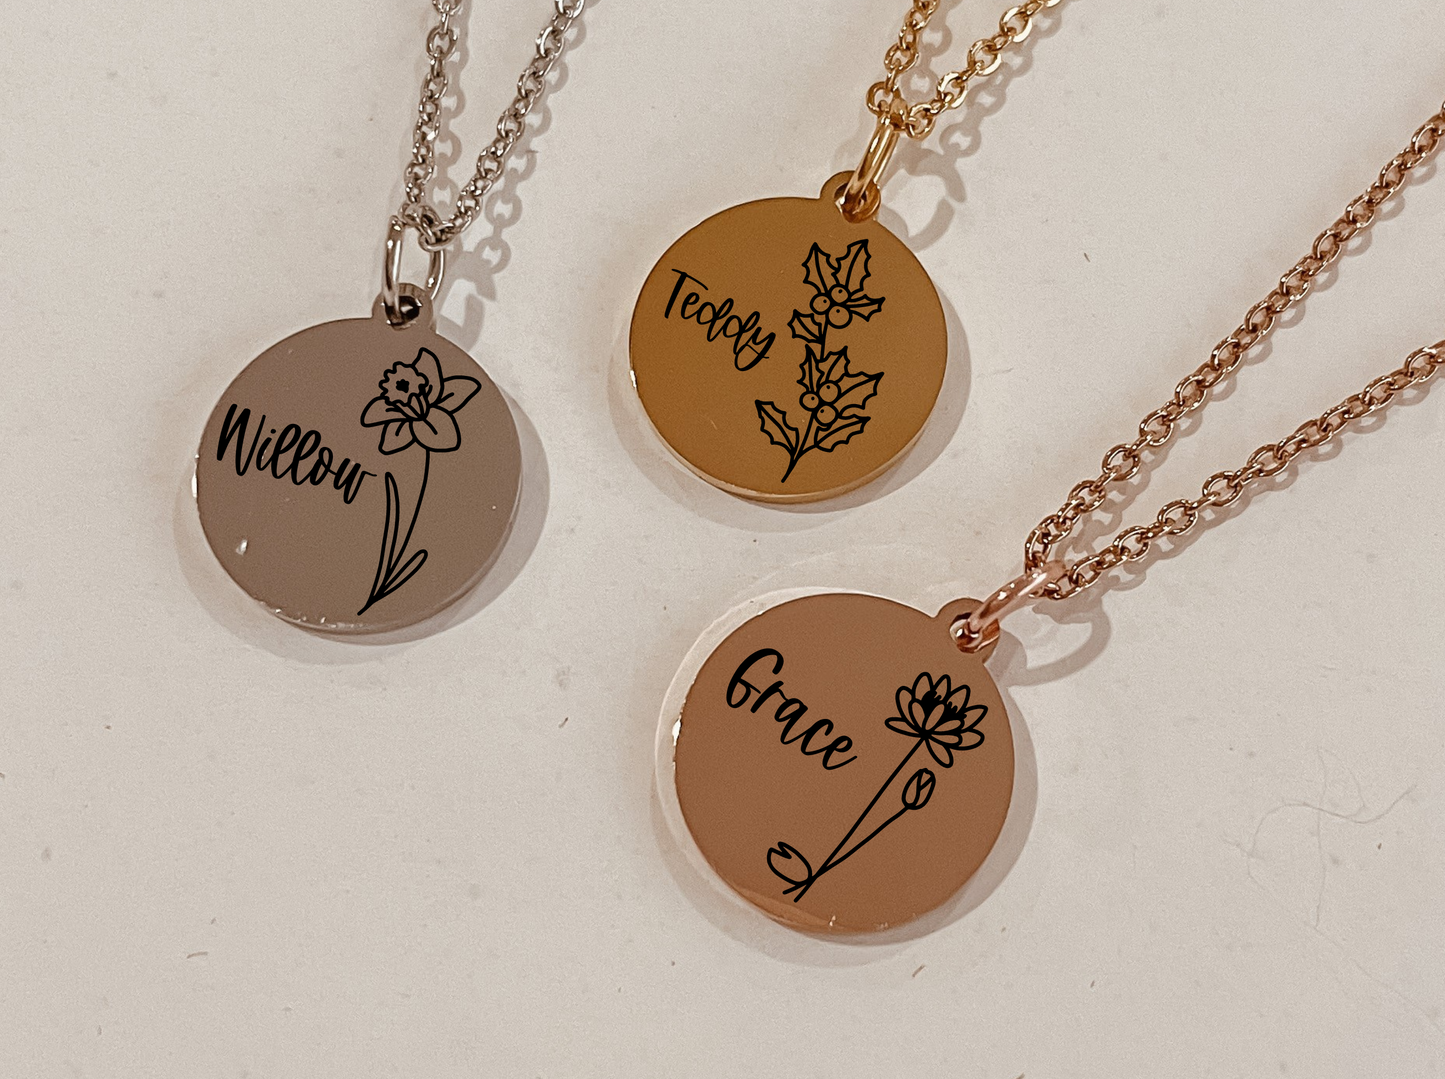 Birth flower with name necklace